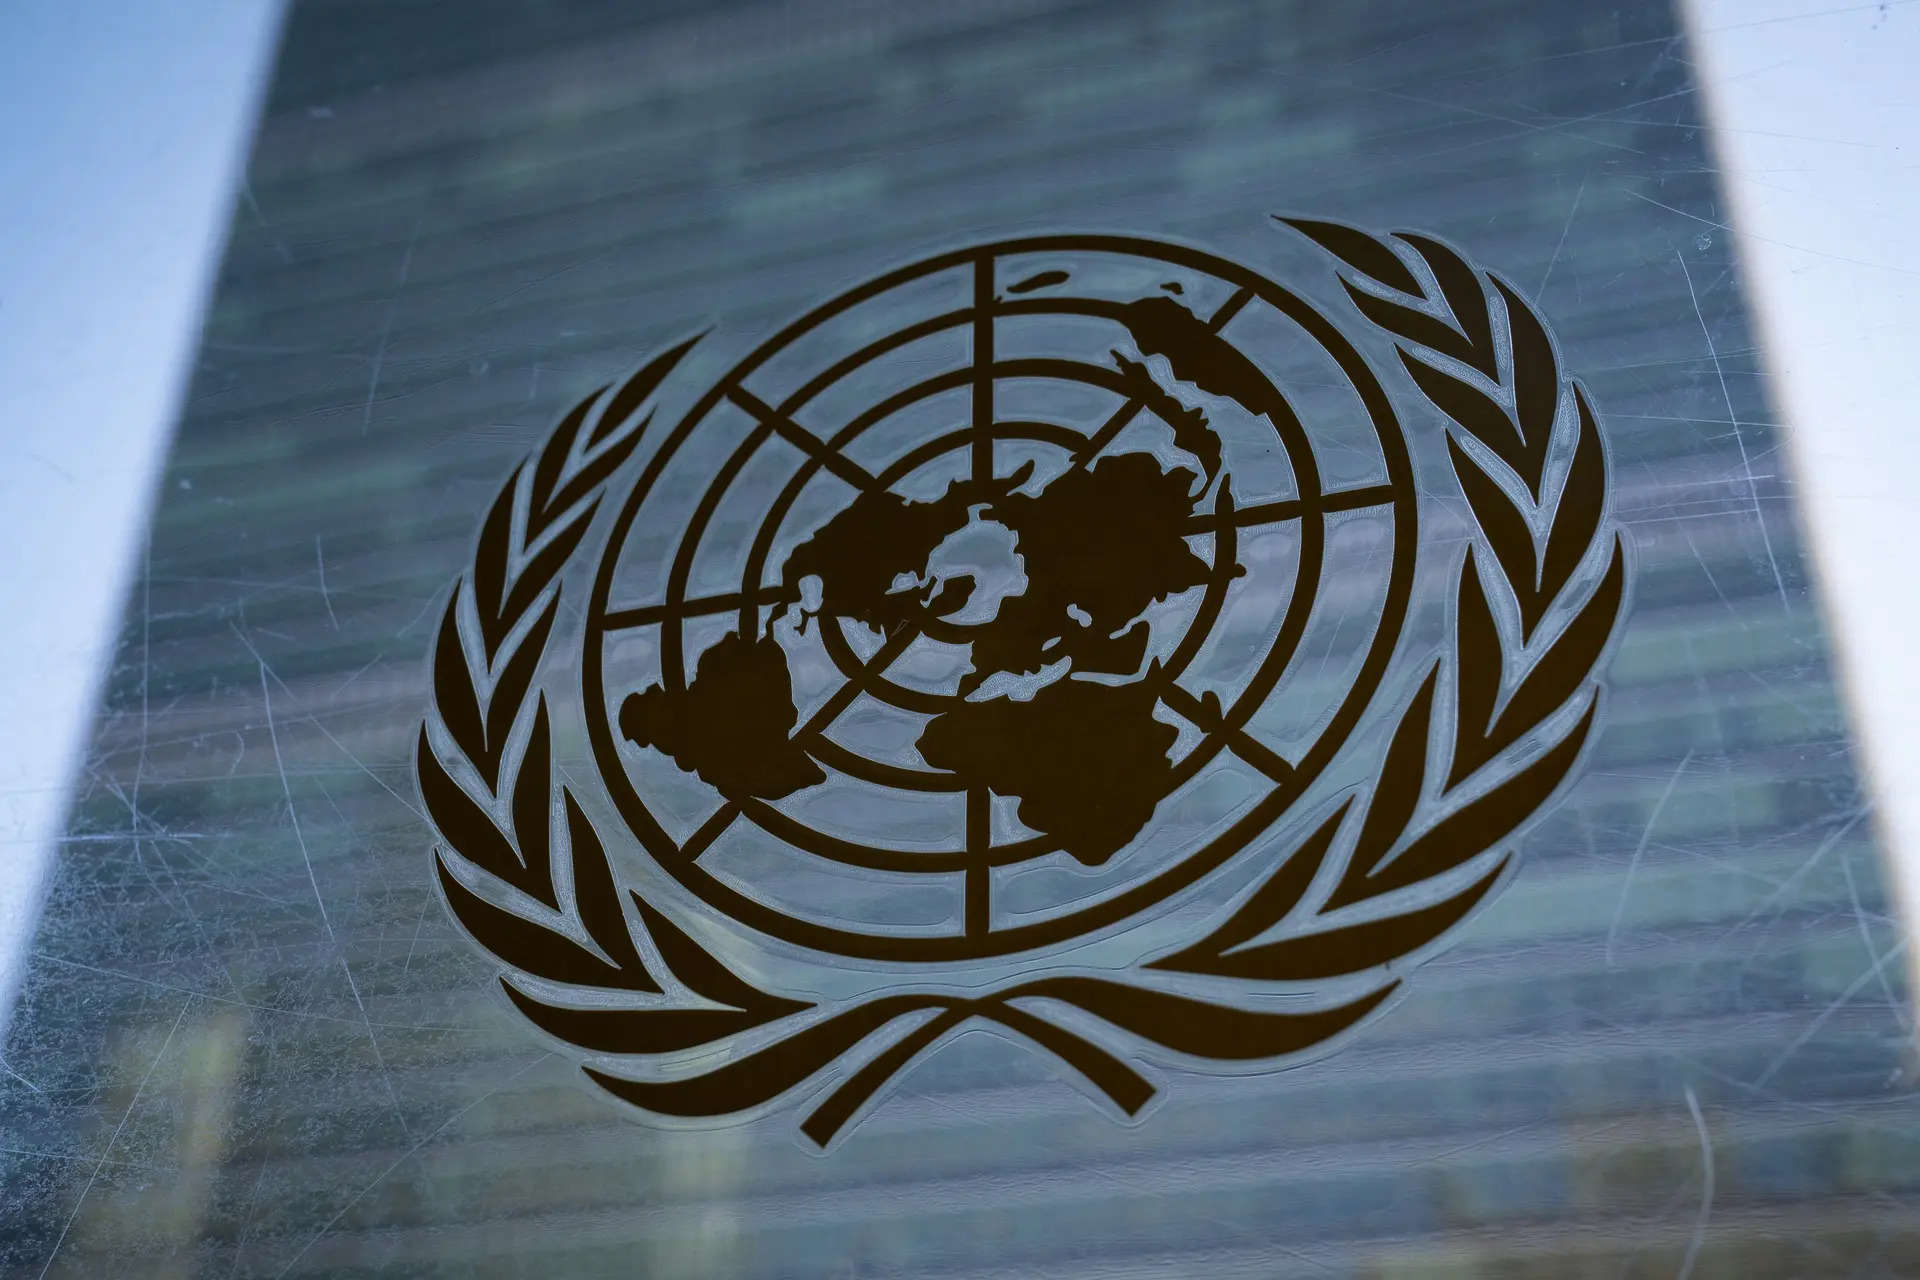 UN fires additional staffers after probe finds potential involvement in Oct 7 attack on Israel 